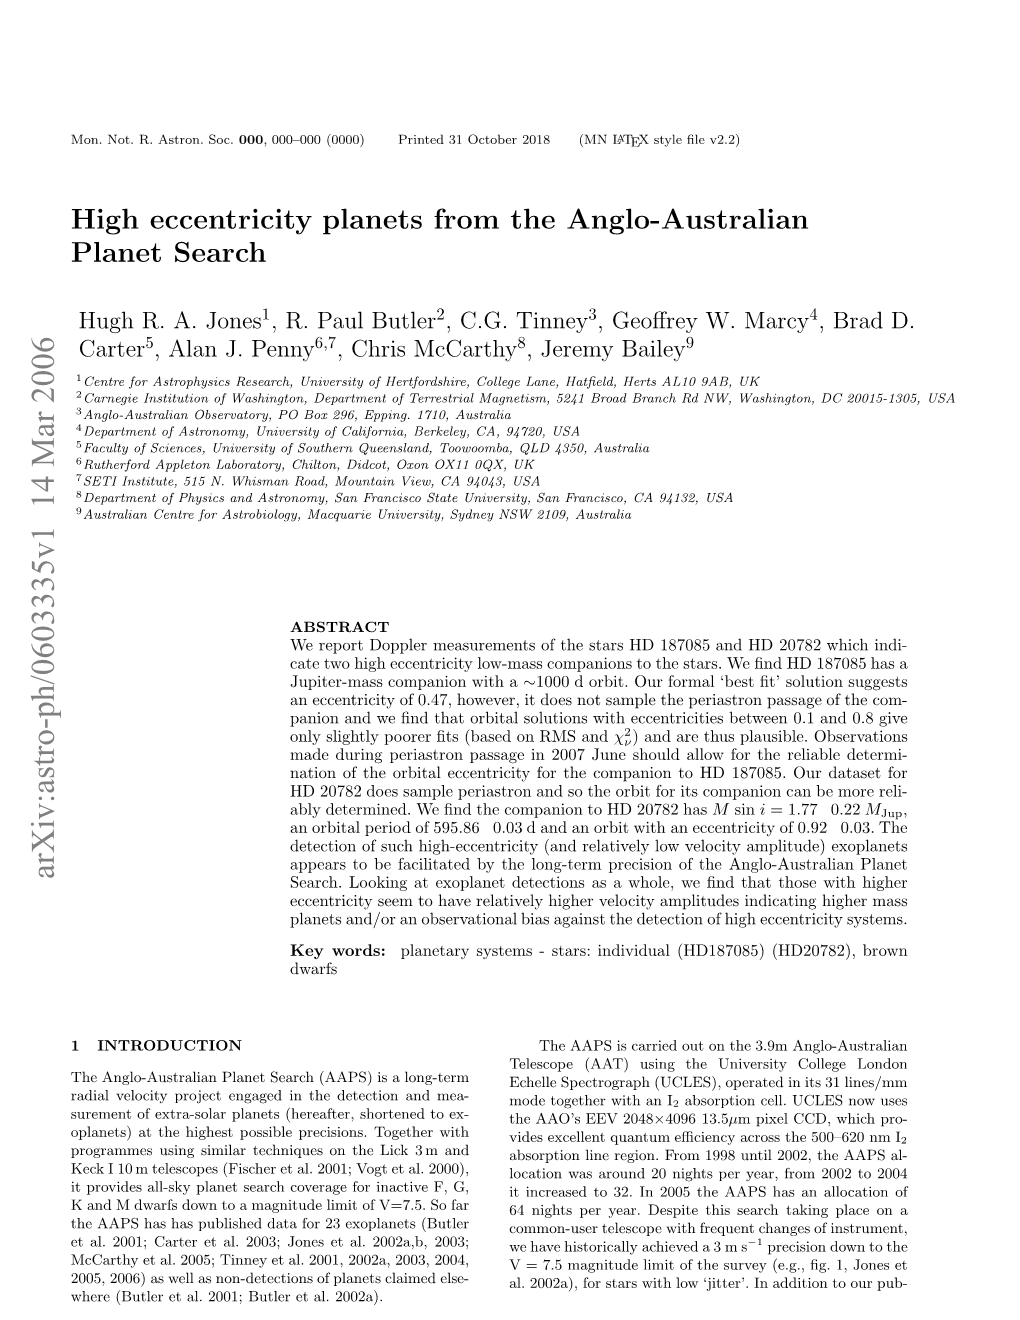 High Eccentricity Planets from the Anglo-Australian Planet Search